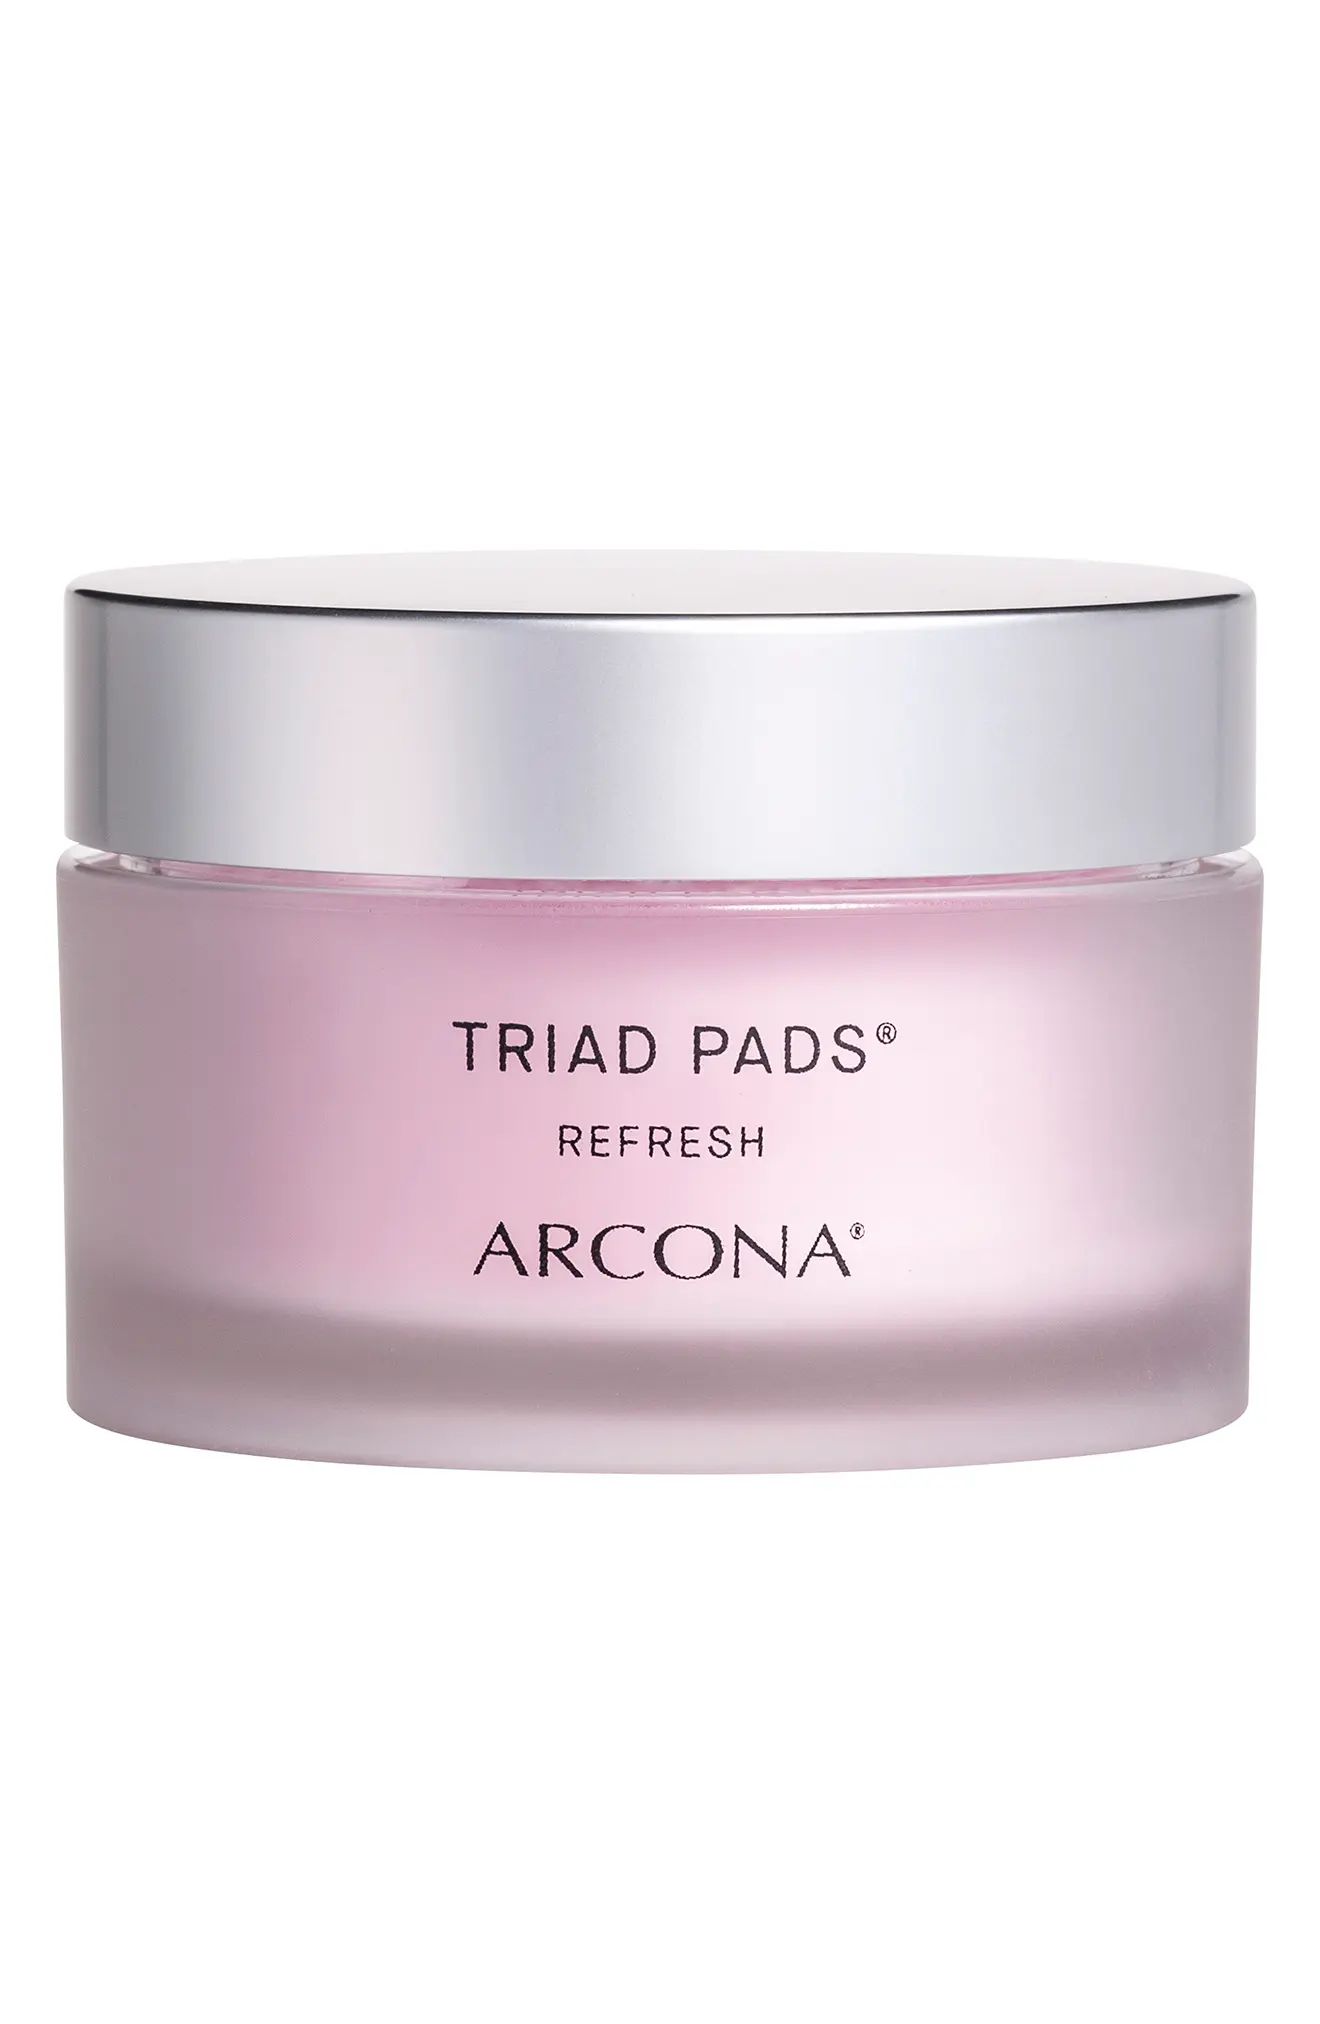 ARCONA Triad Pads Refresh Facial Toner Pads at Nordstrom, Size 10 Count | Nordstrom